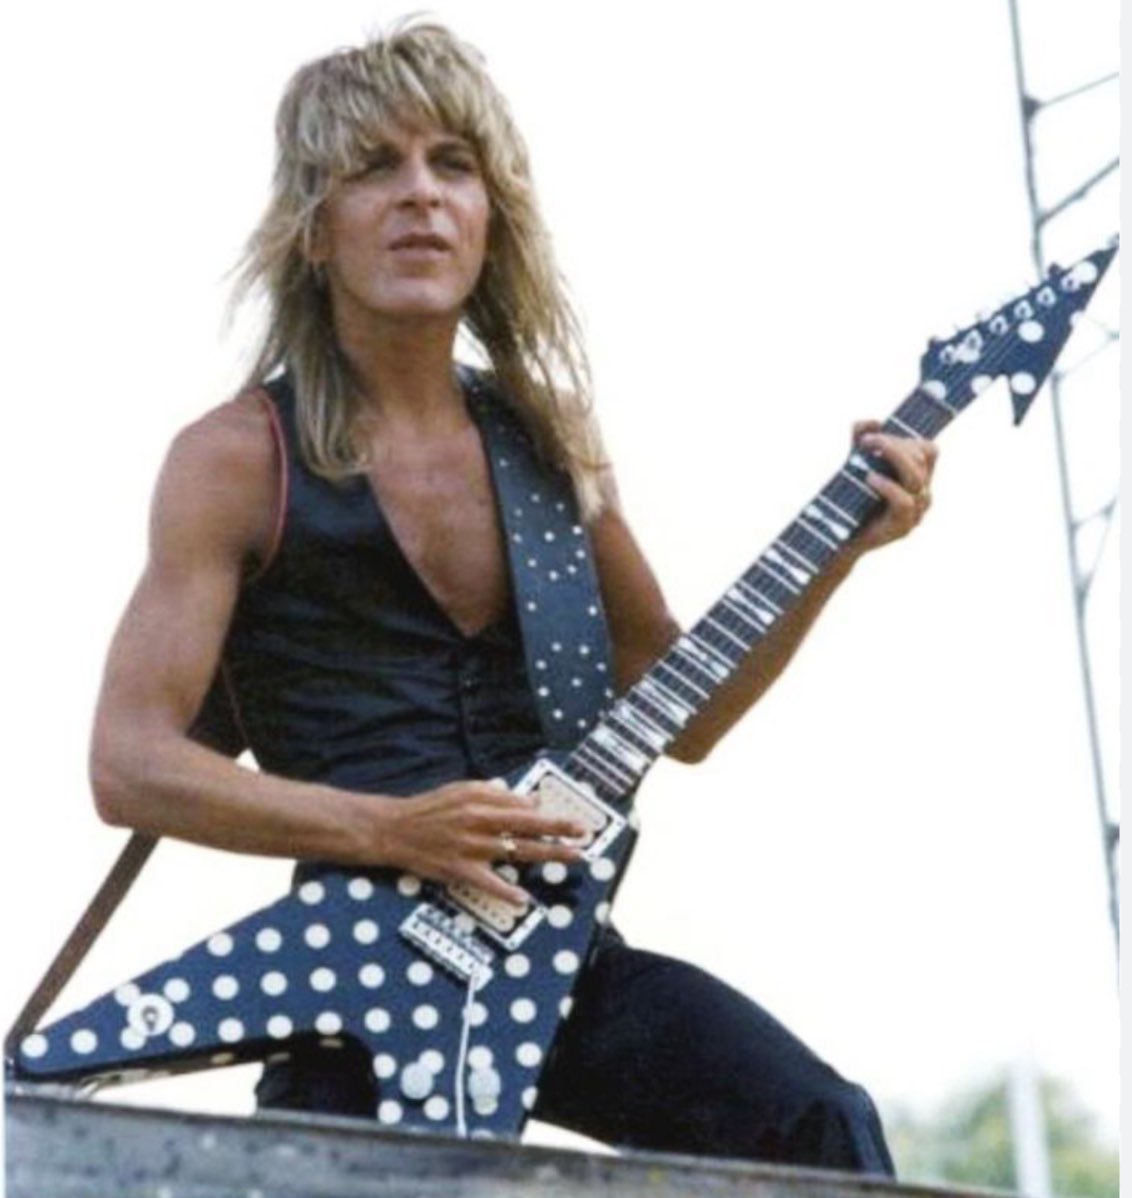 I had a dream that I saw Randy Rhoads in a small bar yesterday. I came home and was telling my wife about it. I said but that couldn’t have been him cuz he died in the 80’s. He was a very small man. In my dream